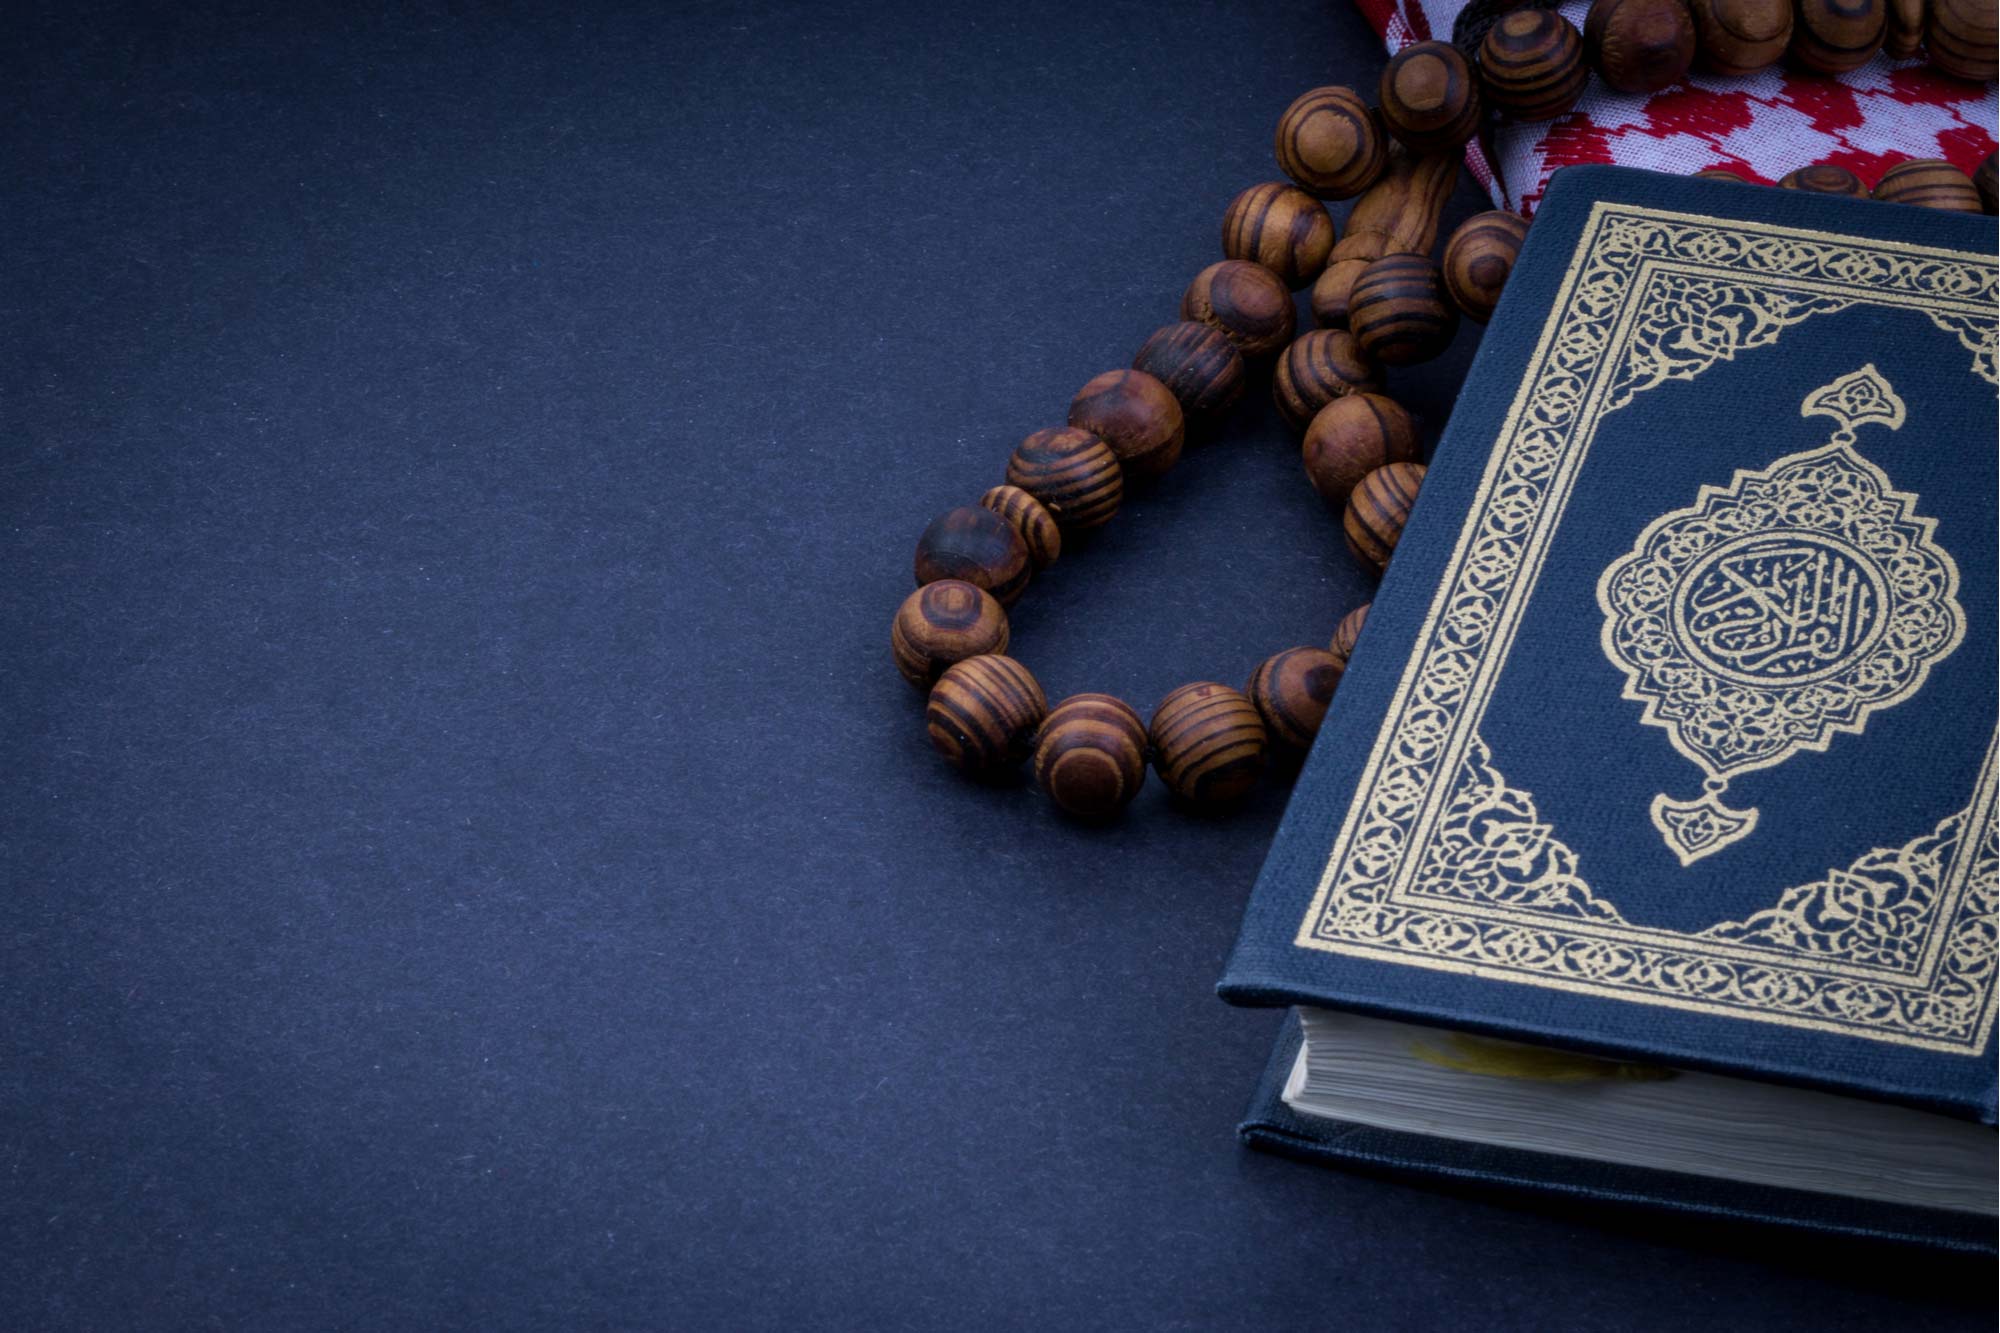 Unable to Recite Qur'an Properly? Well, It's Not That Bad | About Islam